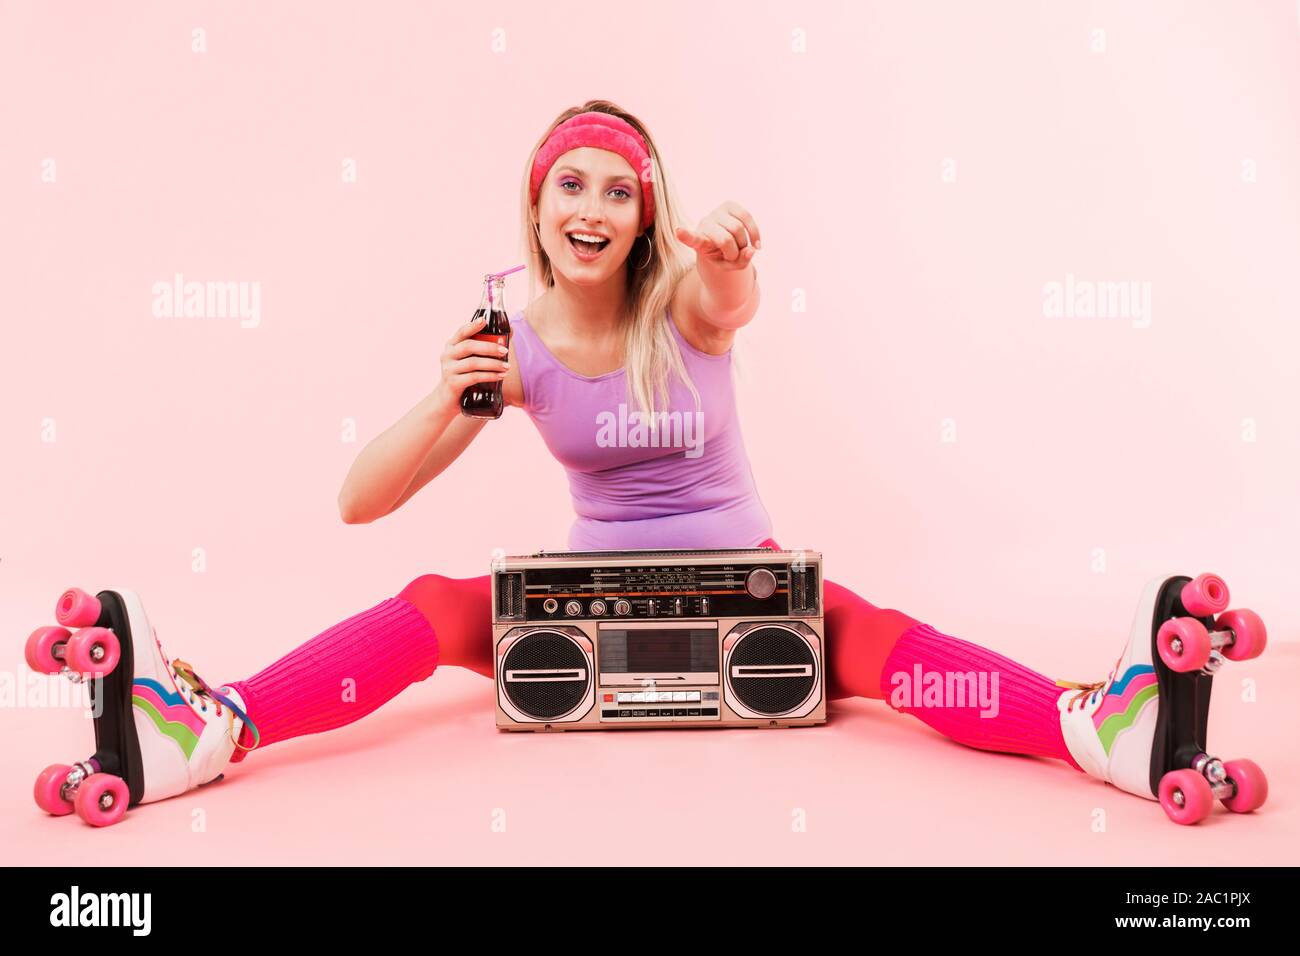 A Looker Leggy Long-haired Young Blonde Woman in a Vintage Roller Skates,  Sunglasses, T-shirt Shorts Sitting on Road. Eye-candy Yo Stock Photo -  Image of american, happy: 84896256